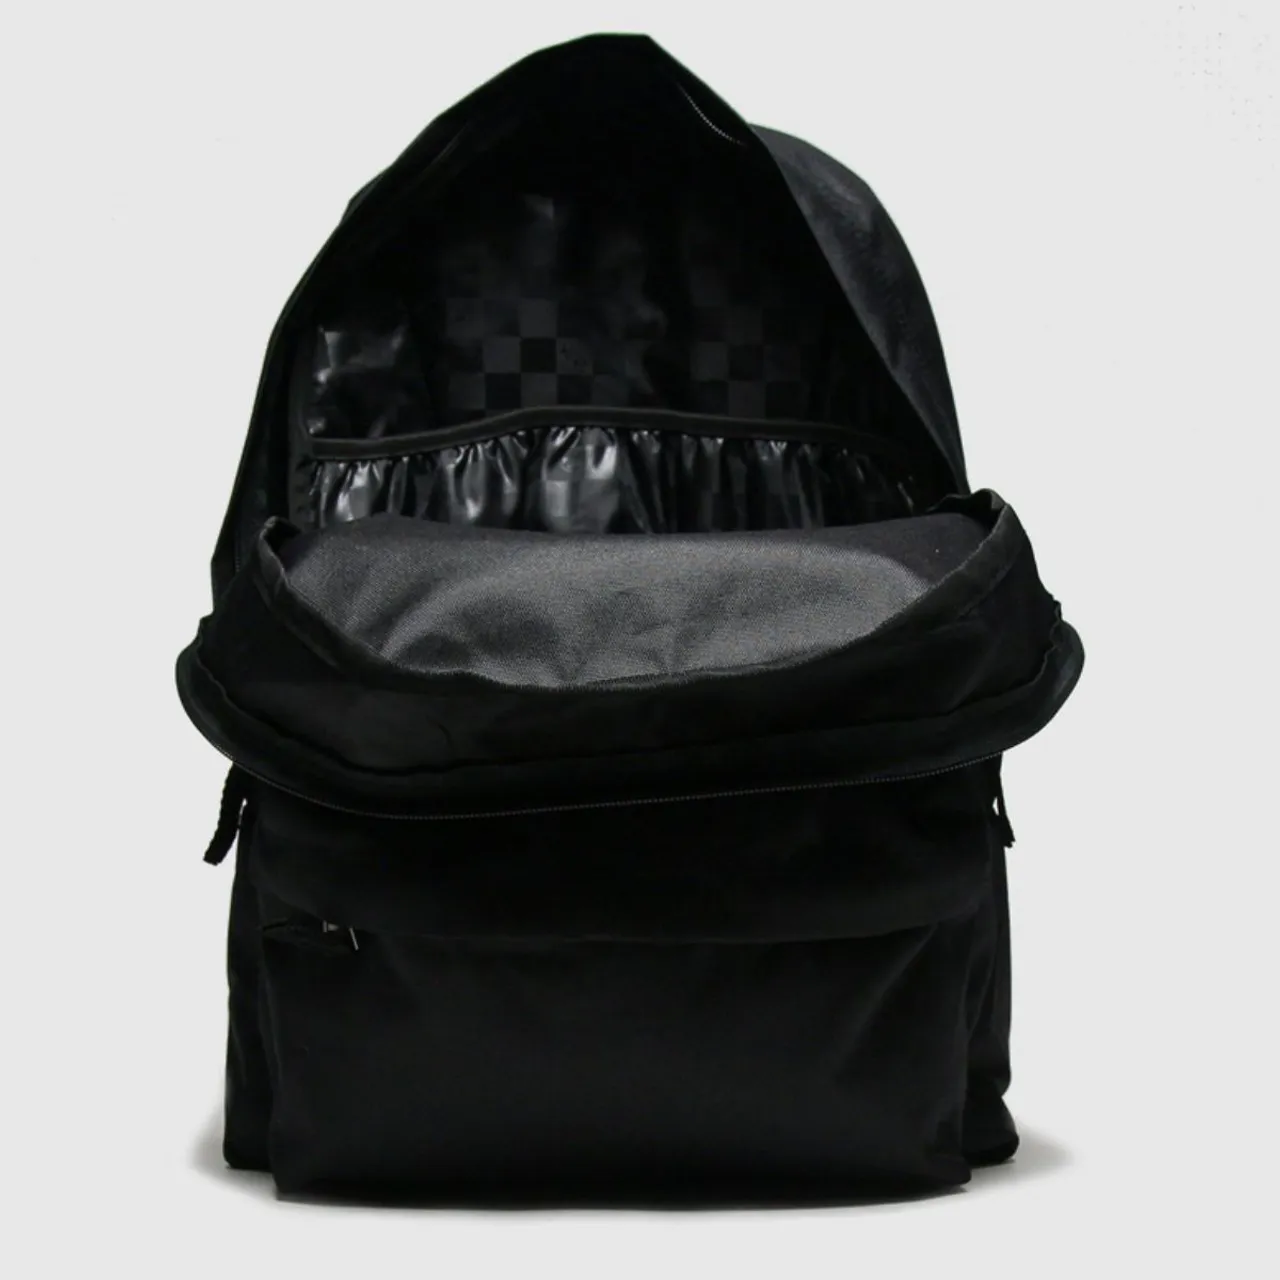 Vans Black & White Realm Backpack, Size: One Size